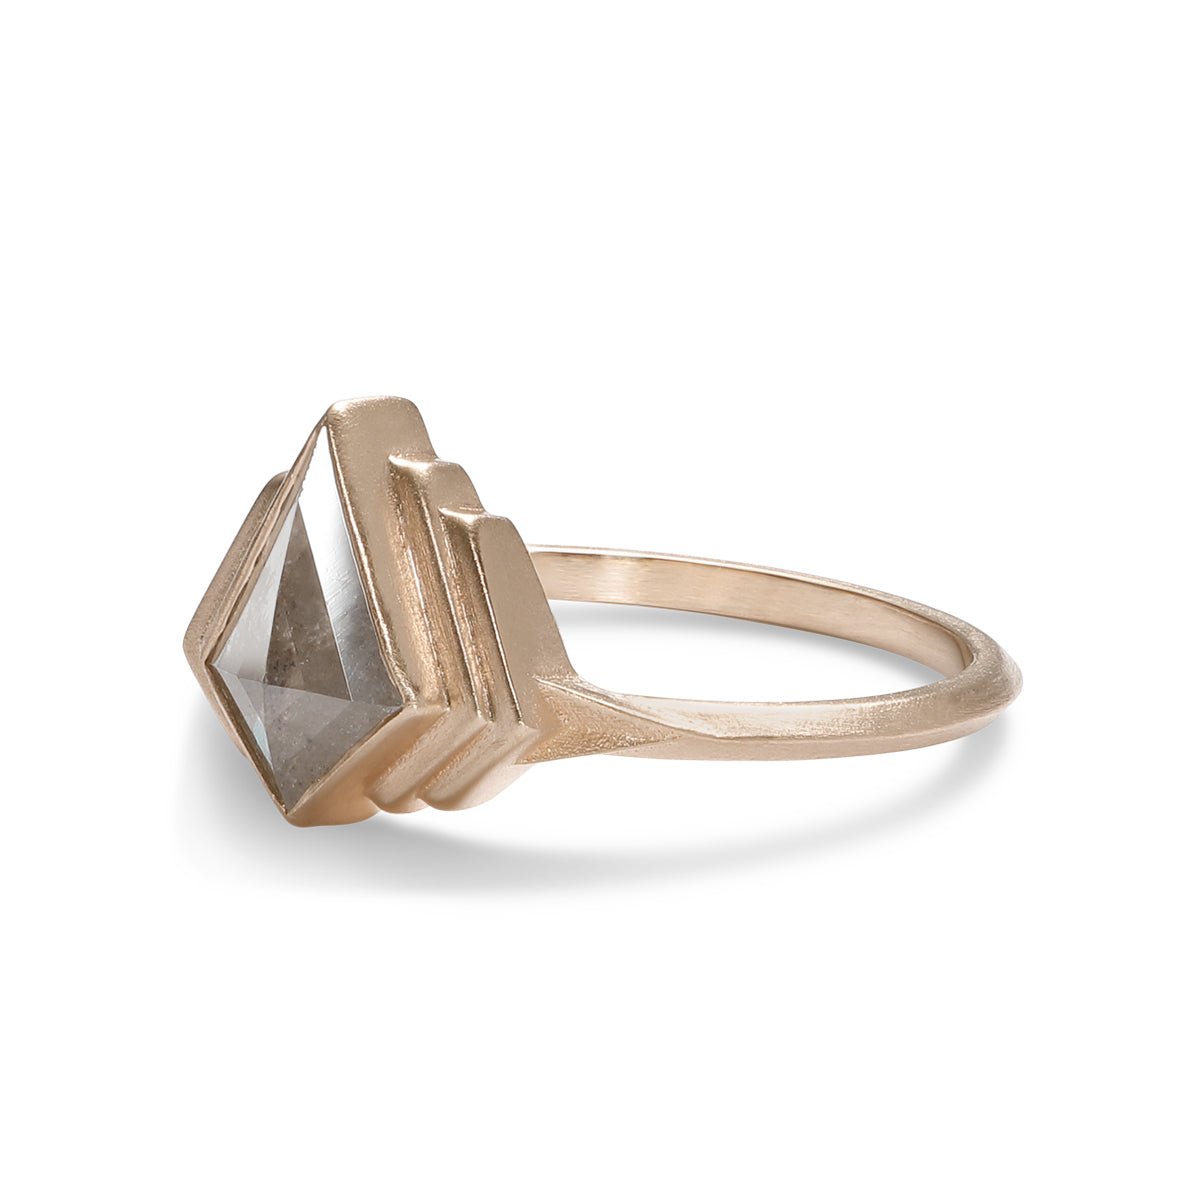 Adra 14K recycled gold ring, with conflict free rosecut kite salt & pepper diamond. Designed and handcrafted in Portland, Oregon.